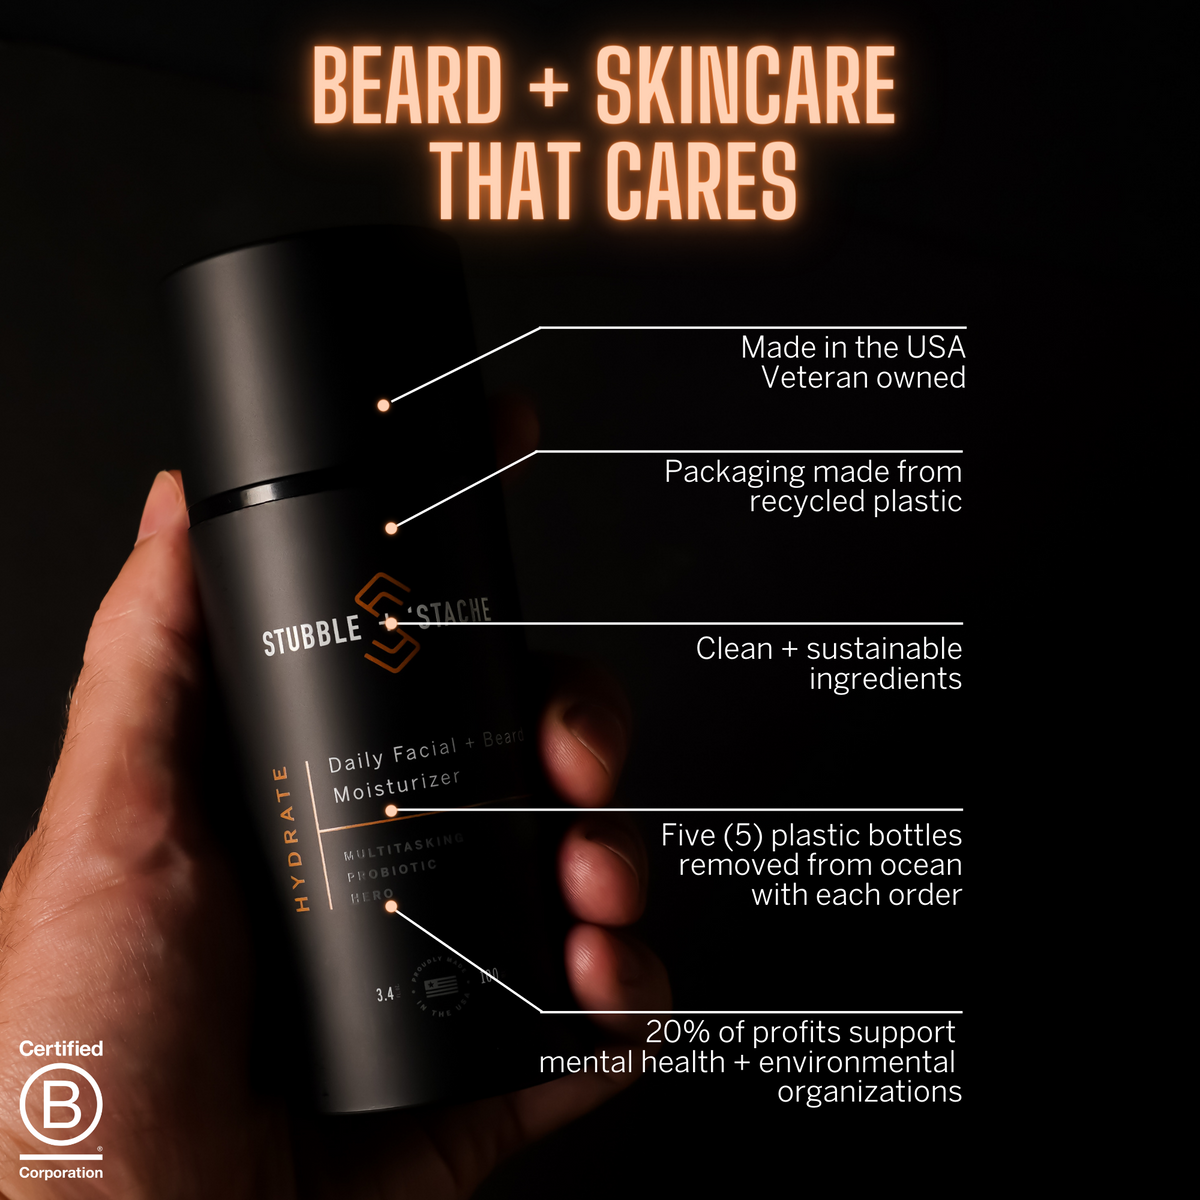 Men&#39;s skincare and beard care that cares certified B Corp 5 plastic bottles removed from ocean with each order packaging made from recycled plastic